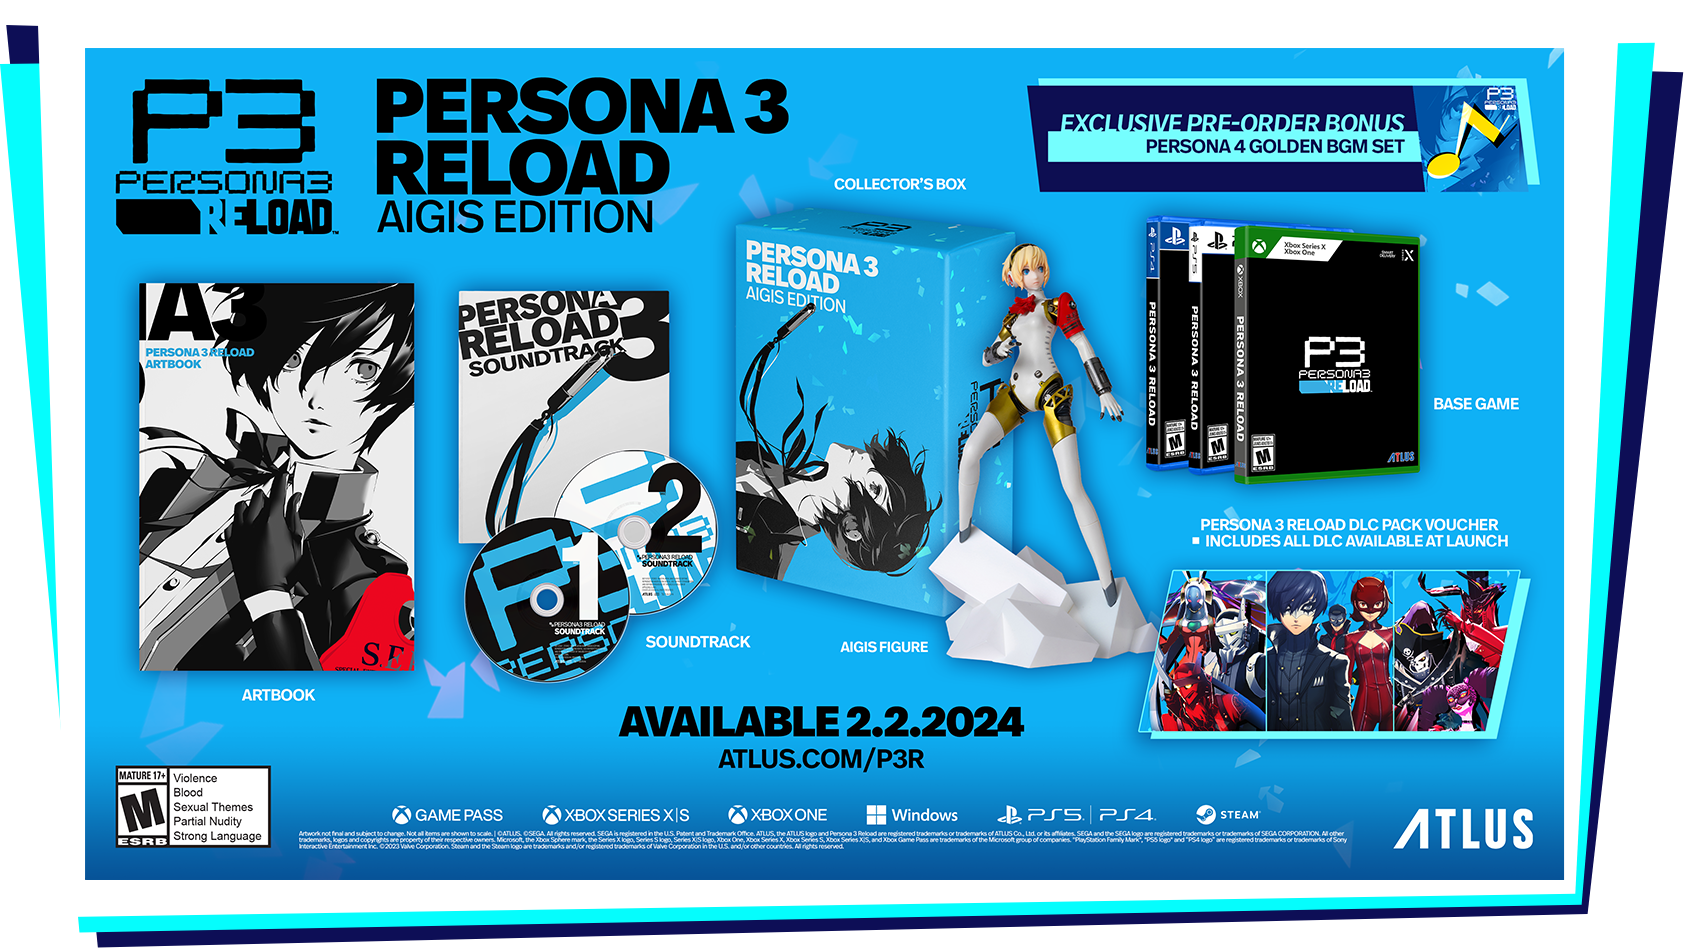 Persona 3 Reload Айгис. Persona 3 Reload ps4 диск. Persona 3 Reload артбук.